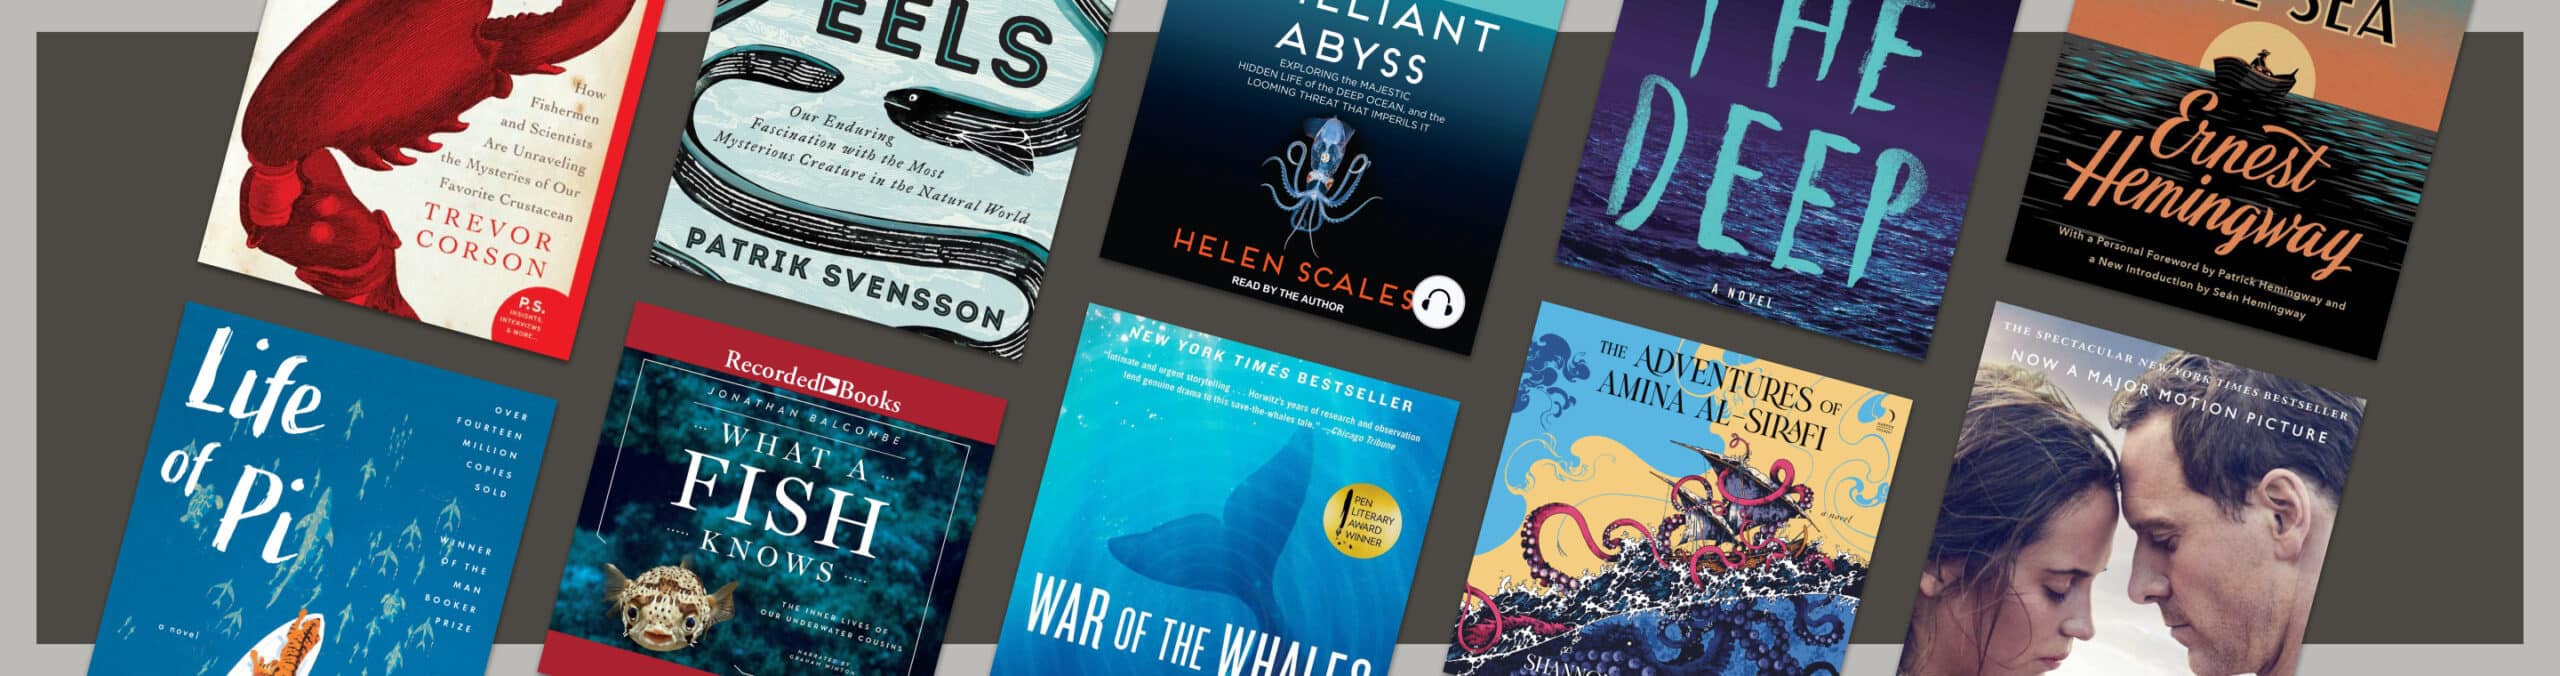 19 books about the ocean and its wonders